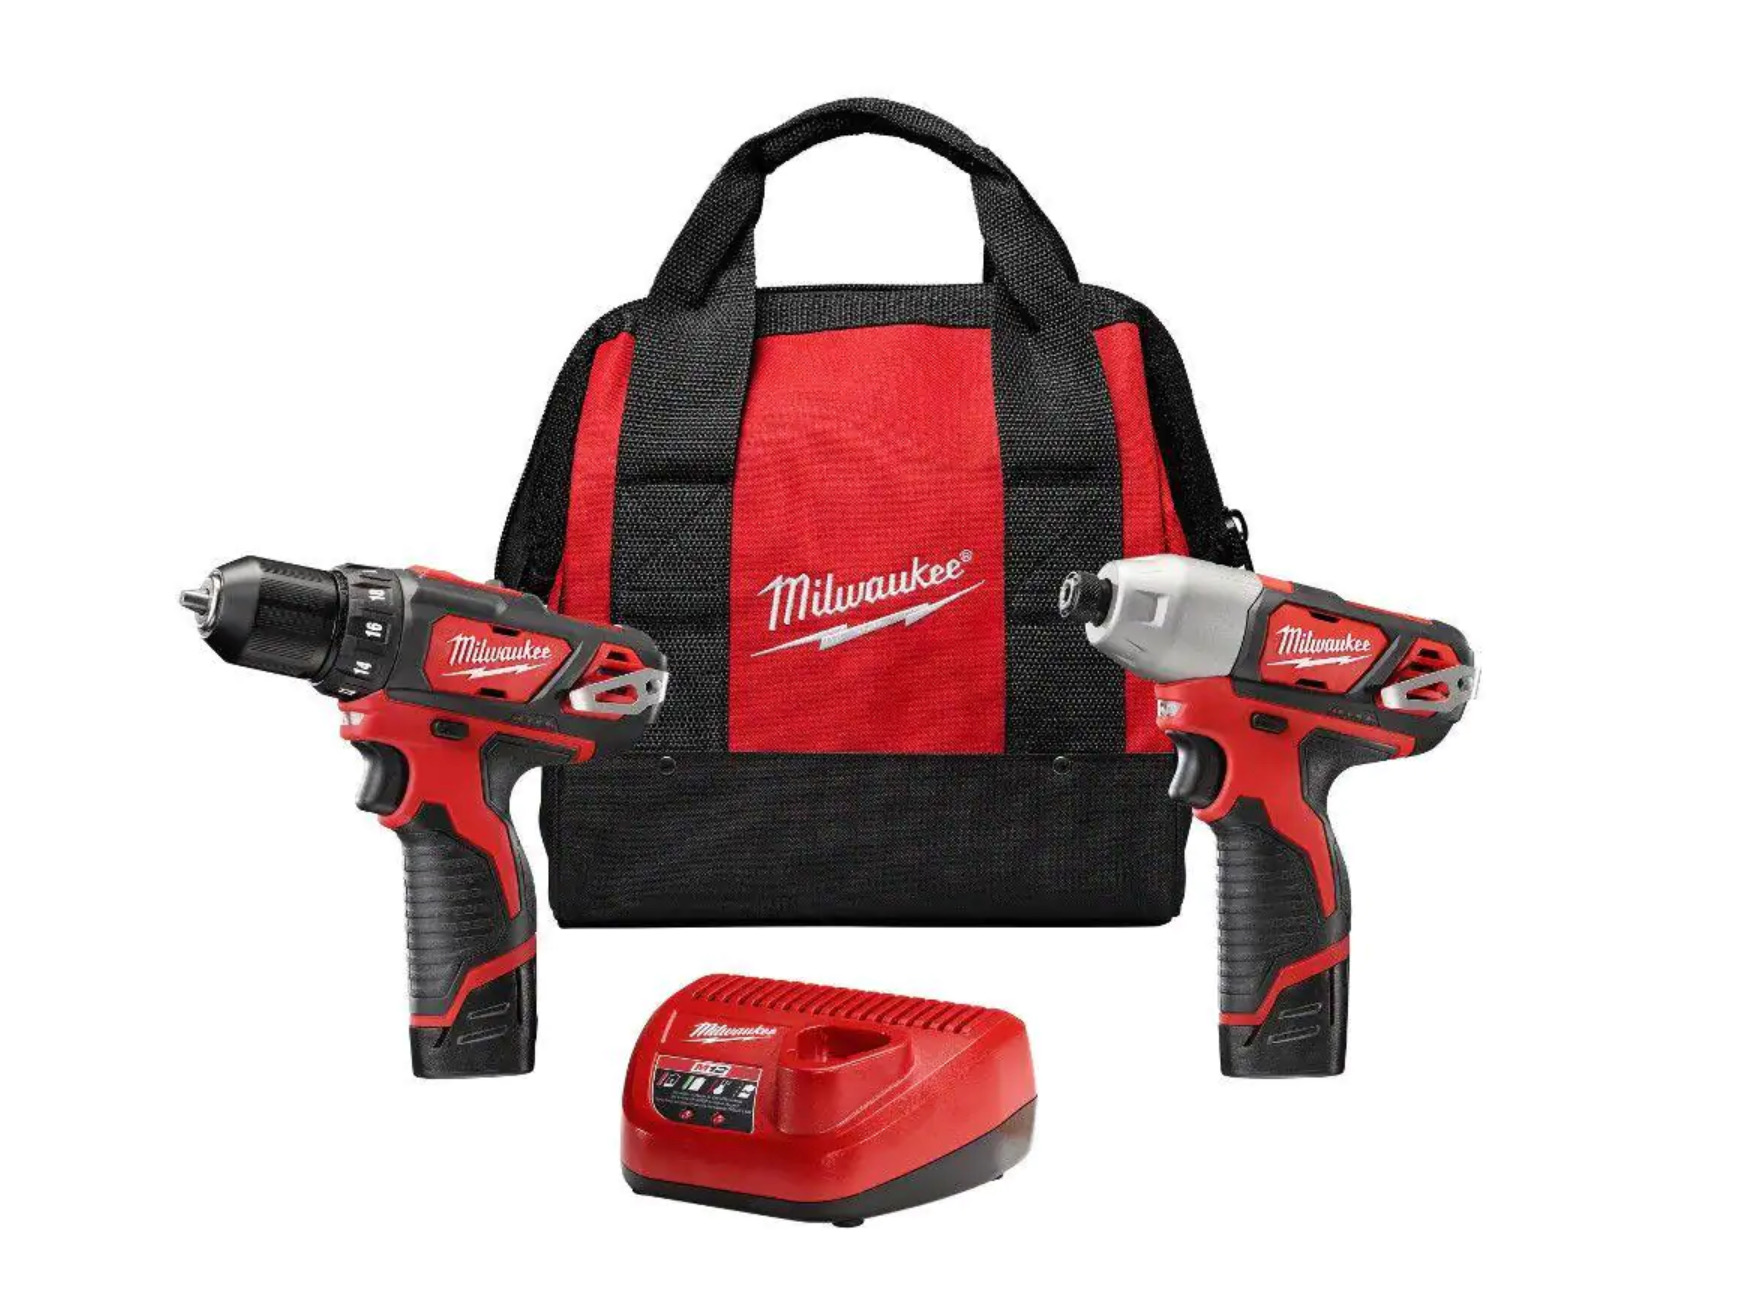 The Home Depot: Up to $100 Off Select Tools, M12 12V Lithium-Ion Cordless Drill Driver/Impact Driver Combo Kit $99 + Free Delivery